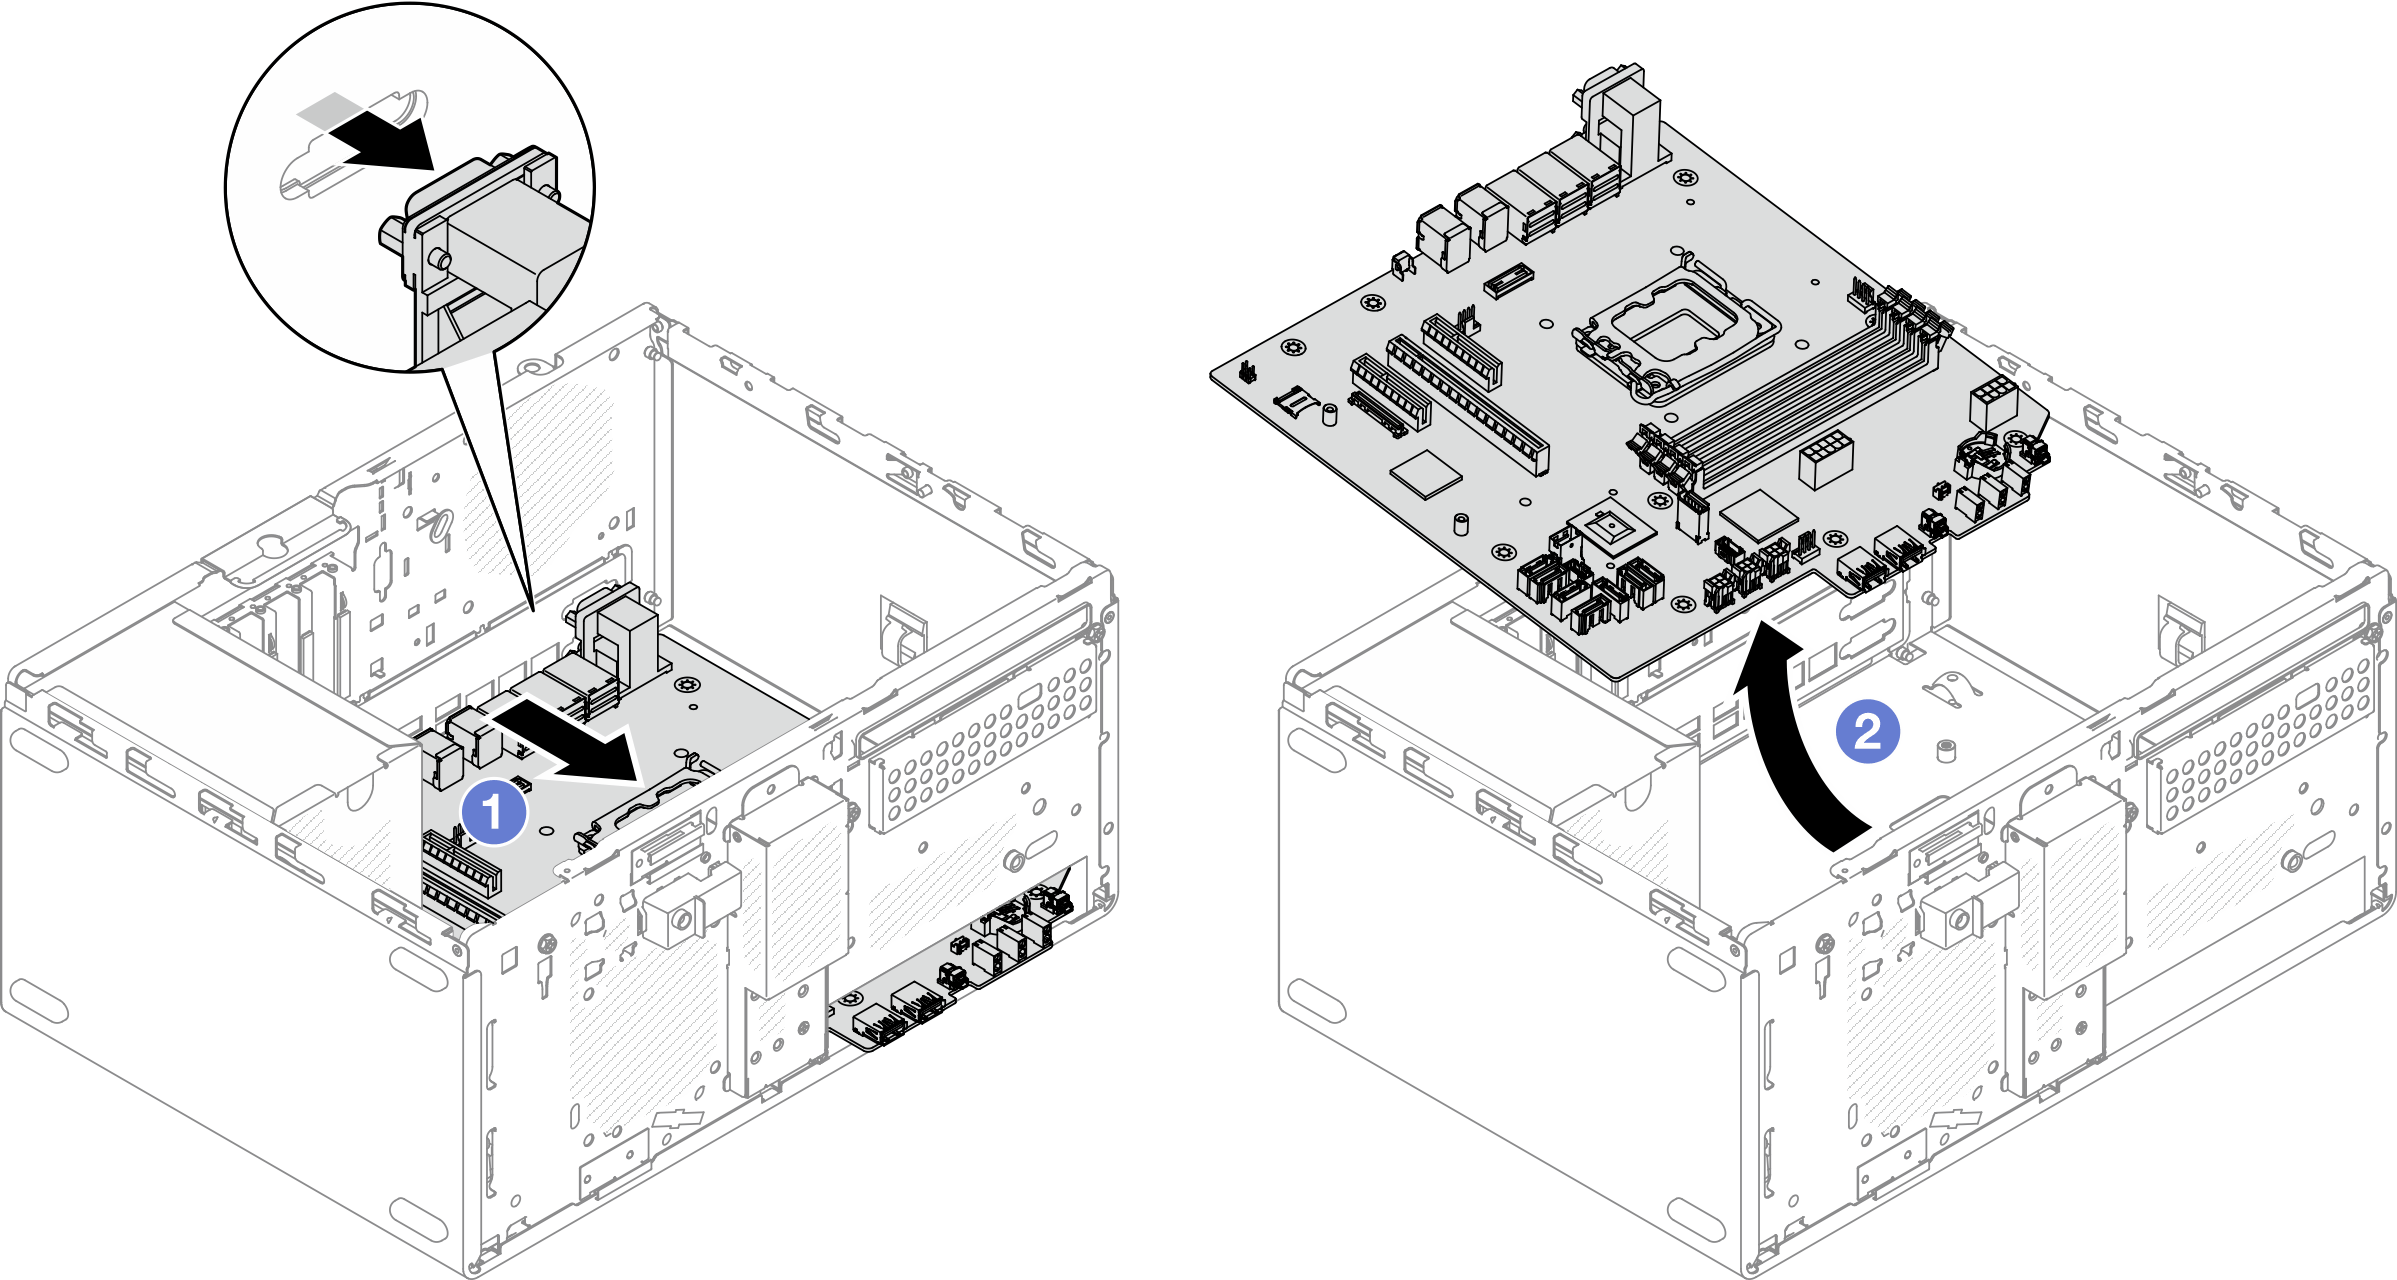 Removing the system board from the chassis